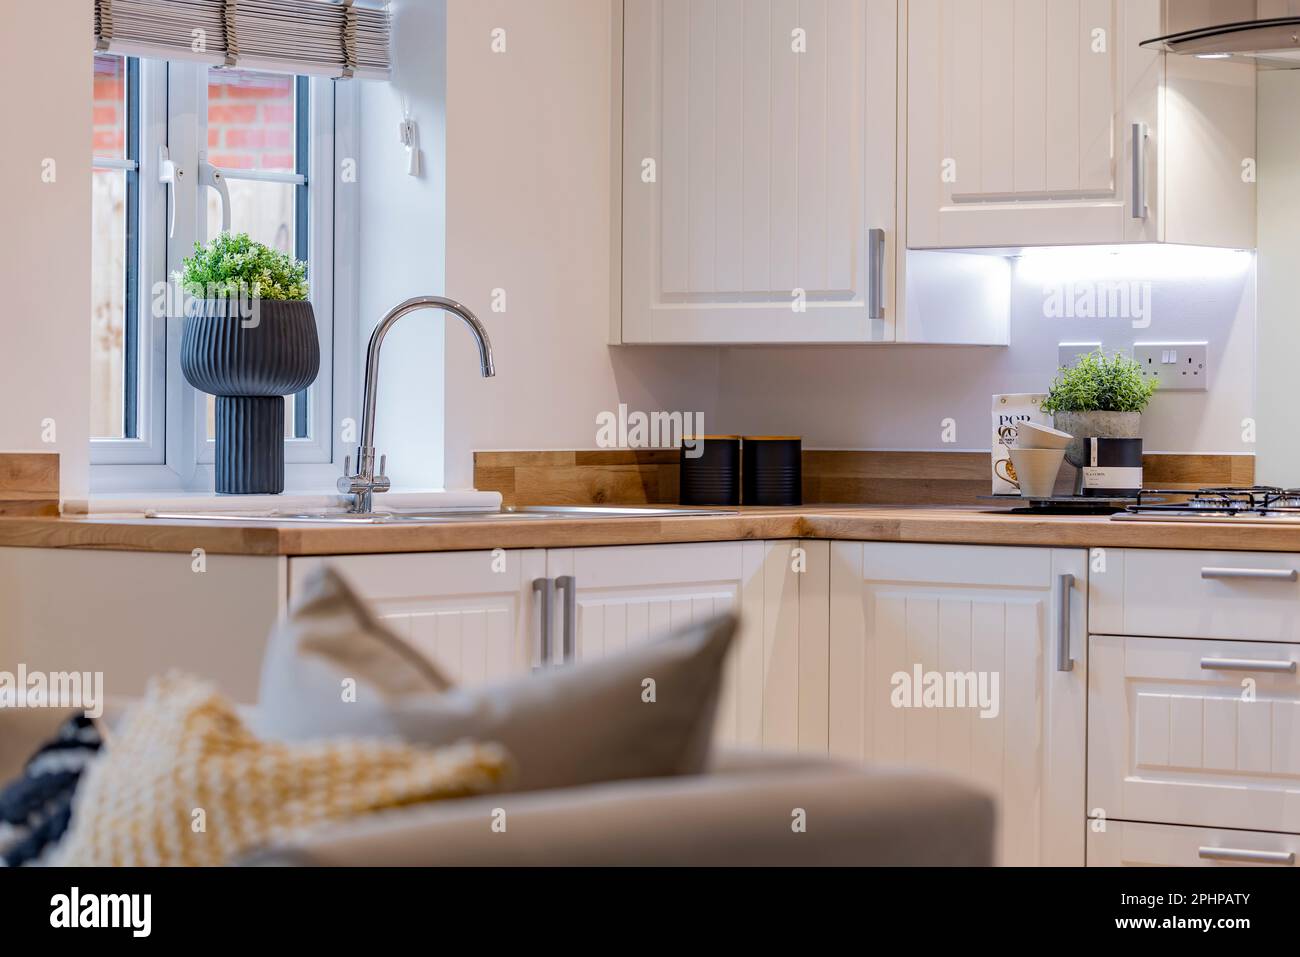 Interior Design, Kitchens and Dining Areas Stock Photo